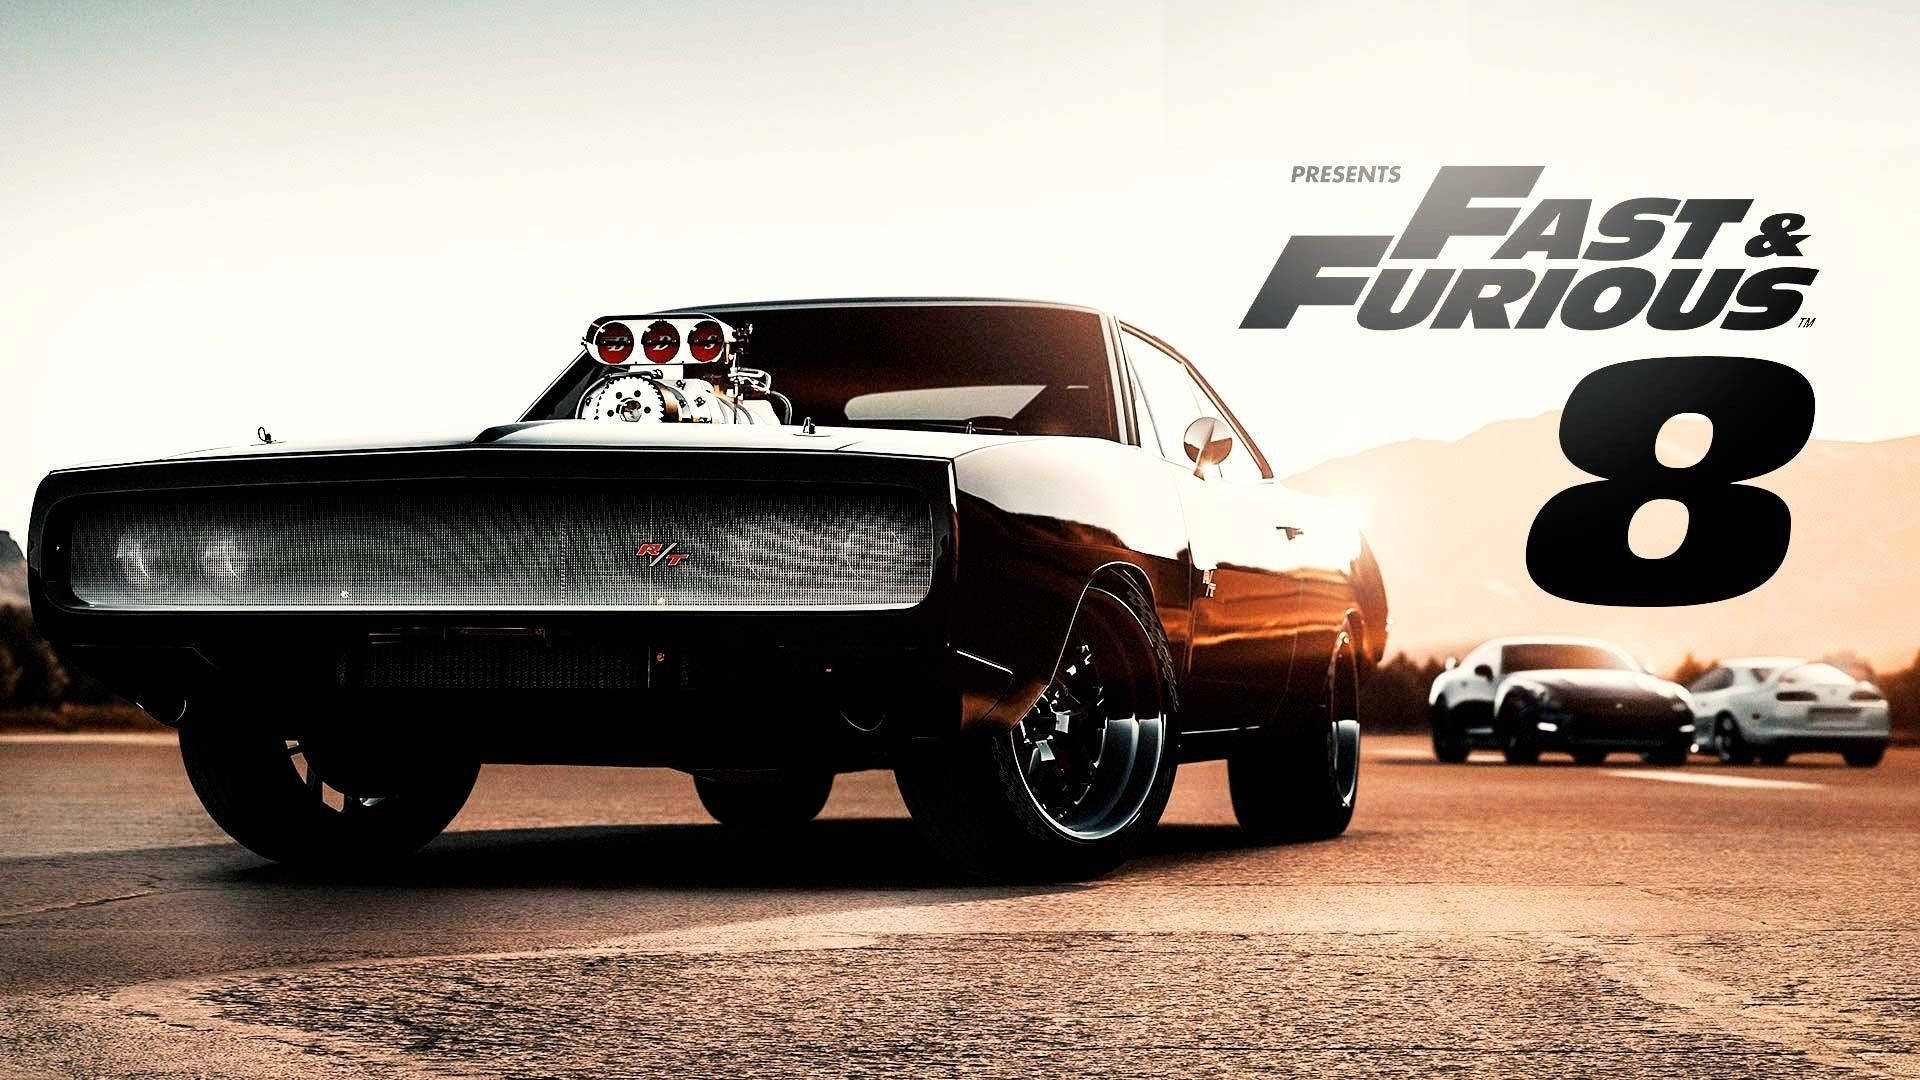 Download Fast And Furious 8 Dodge Charger Wallpaper 